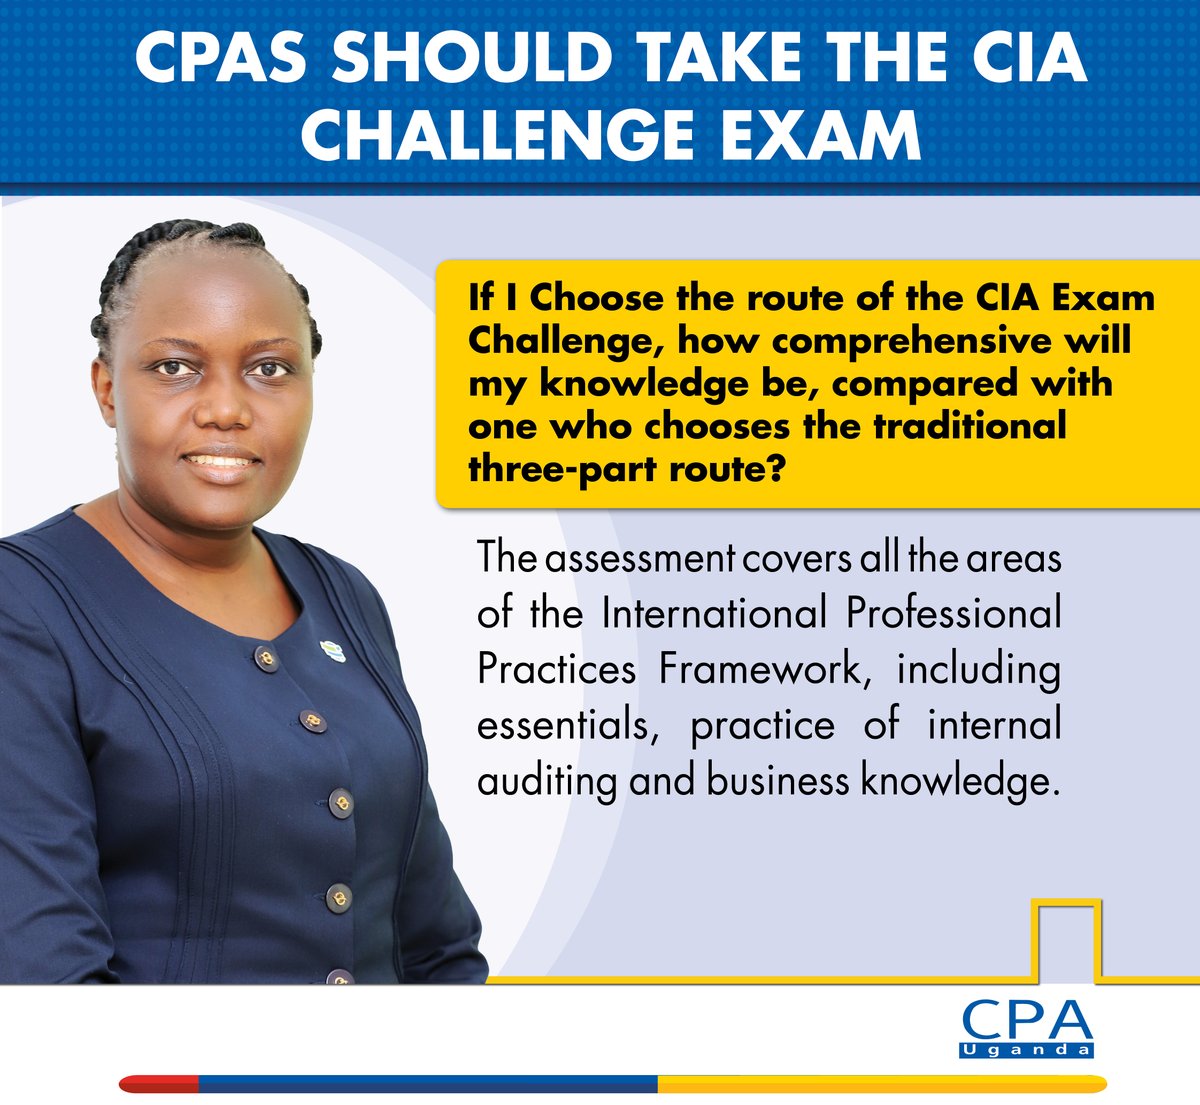 Ready to take your career to the next level? Seize the opportunity to become a Certified Internal Auditor (CIA) with our CIA Challenge Examination. Register via iiauganda.org #WeCreateImpact